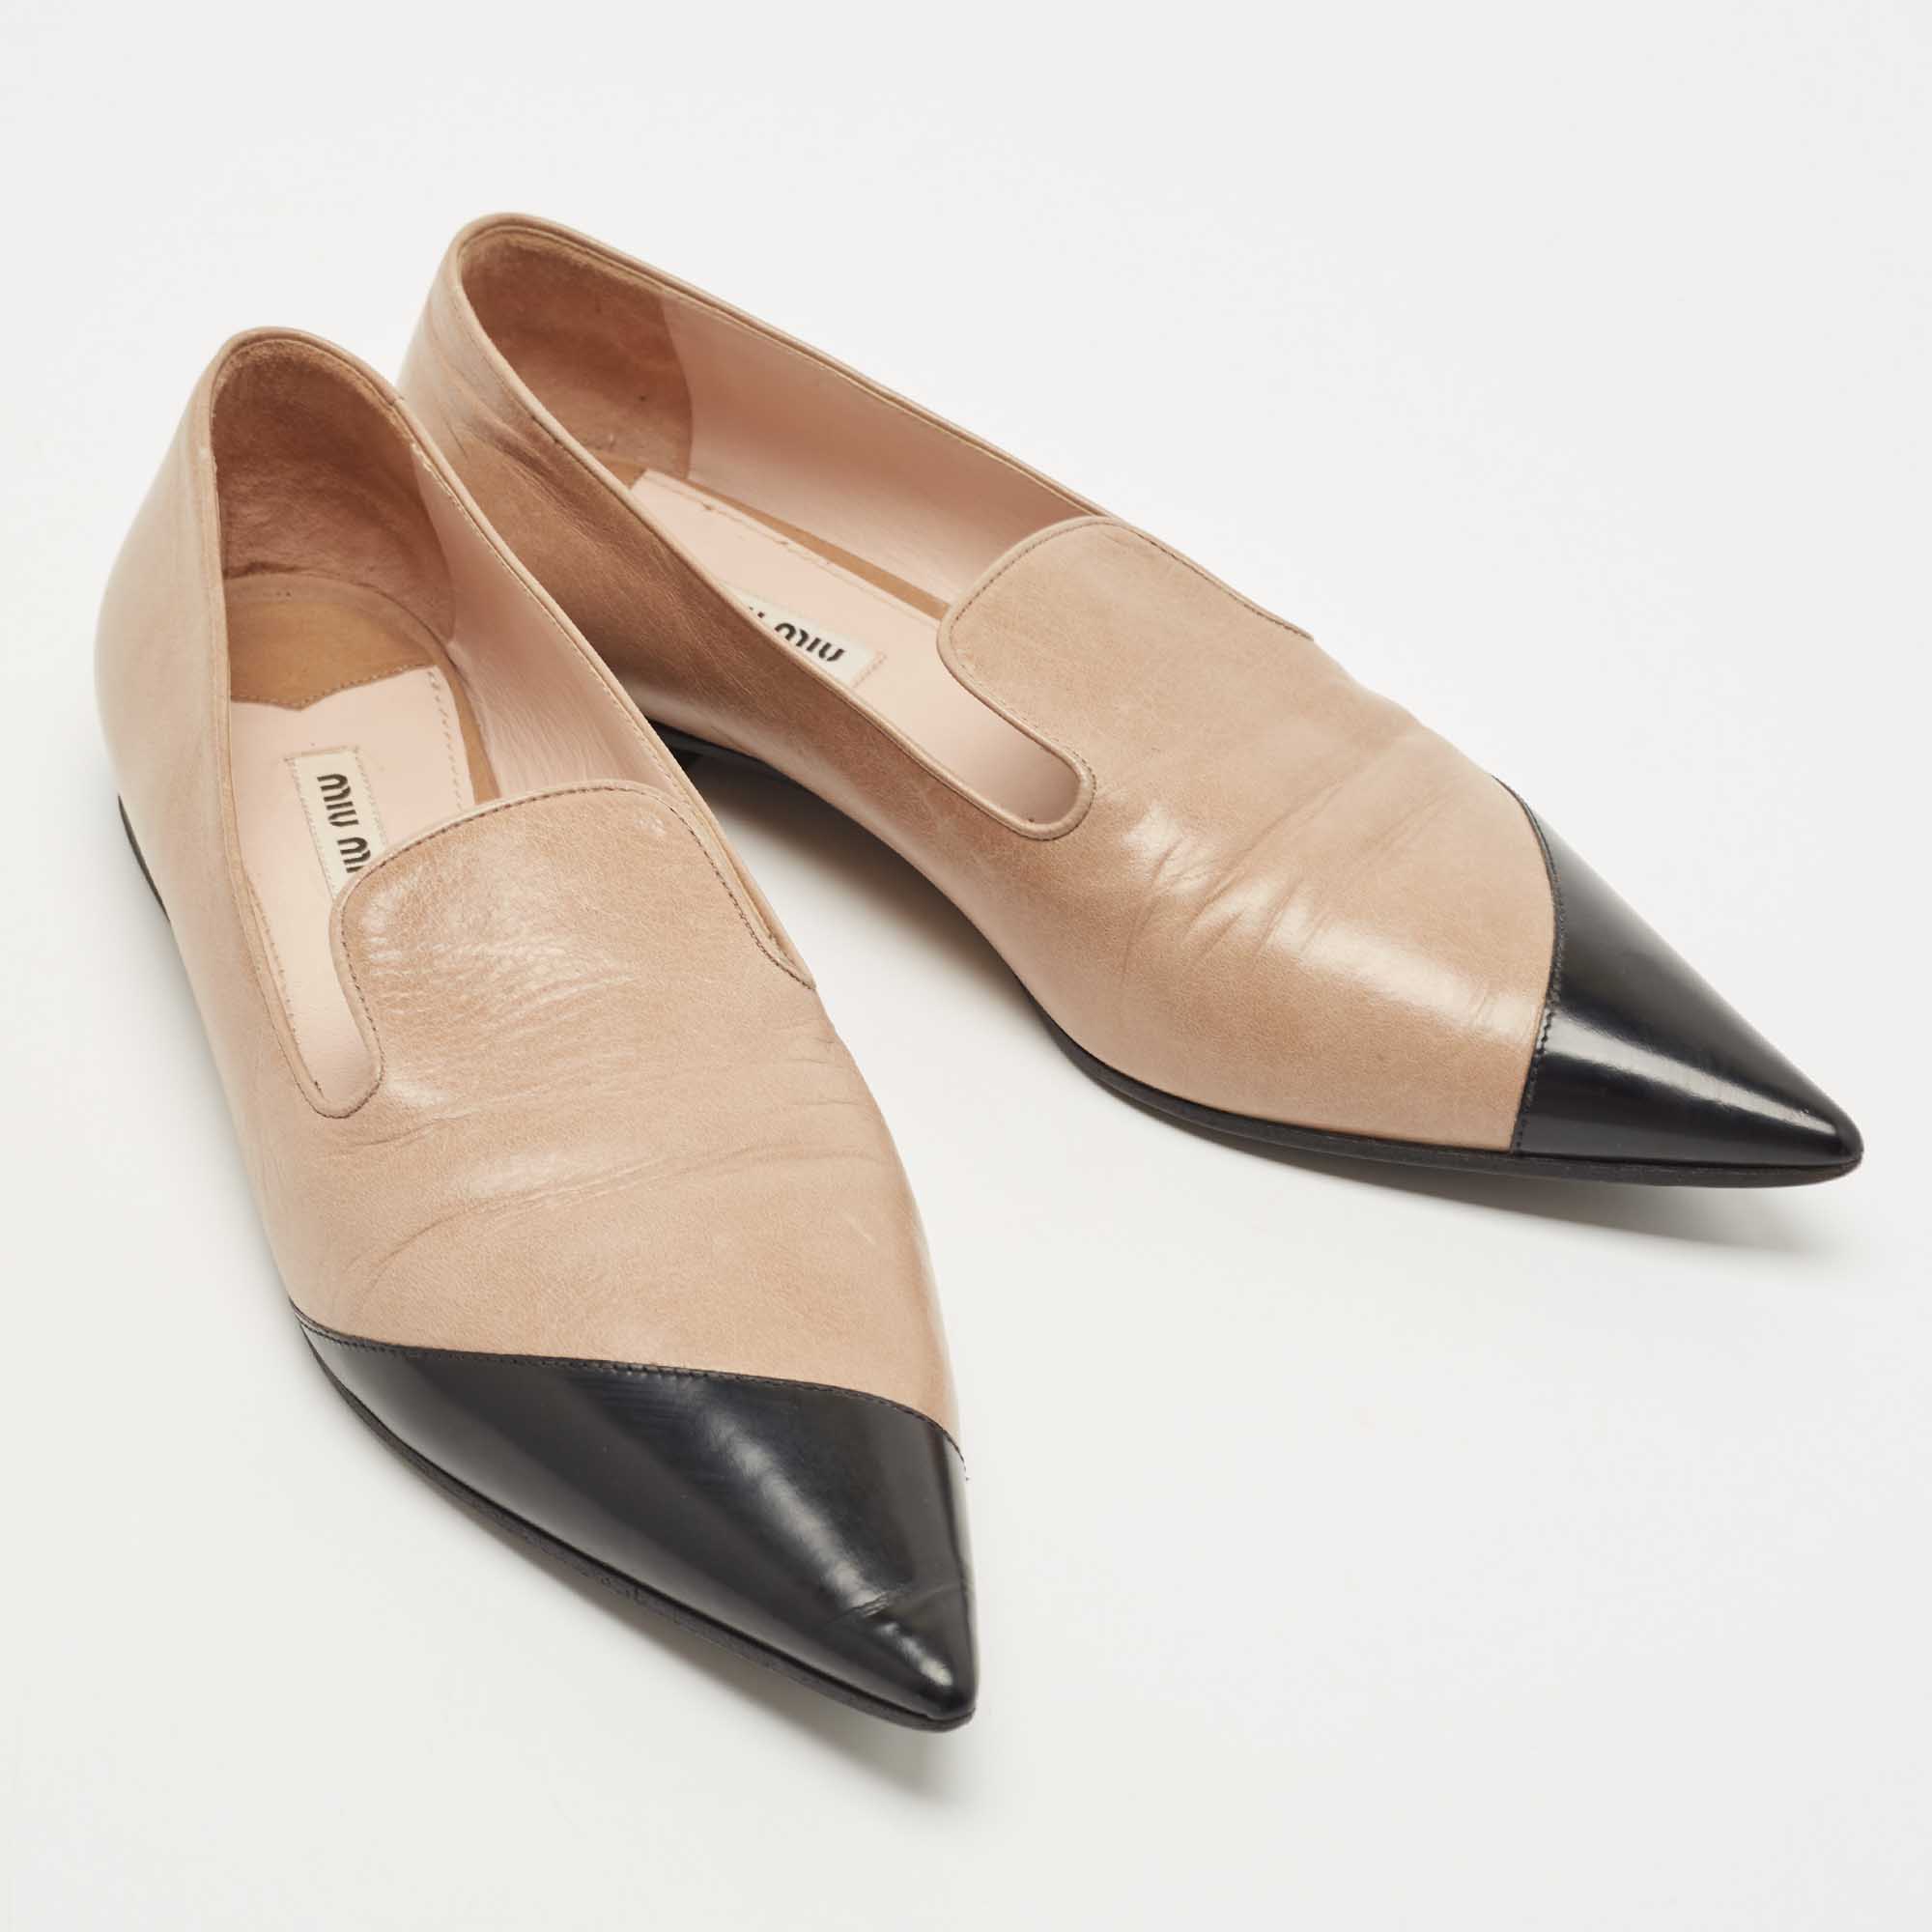 Miu Miu Light Brown/Black Leather Pointed Toe Loafers Size 40